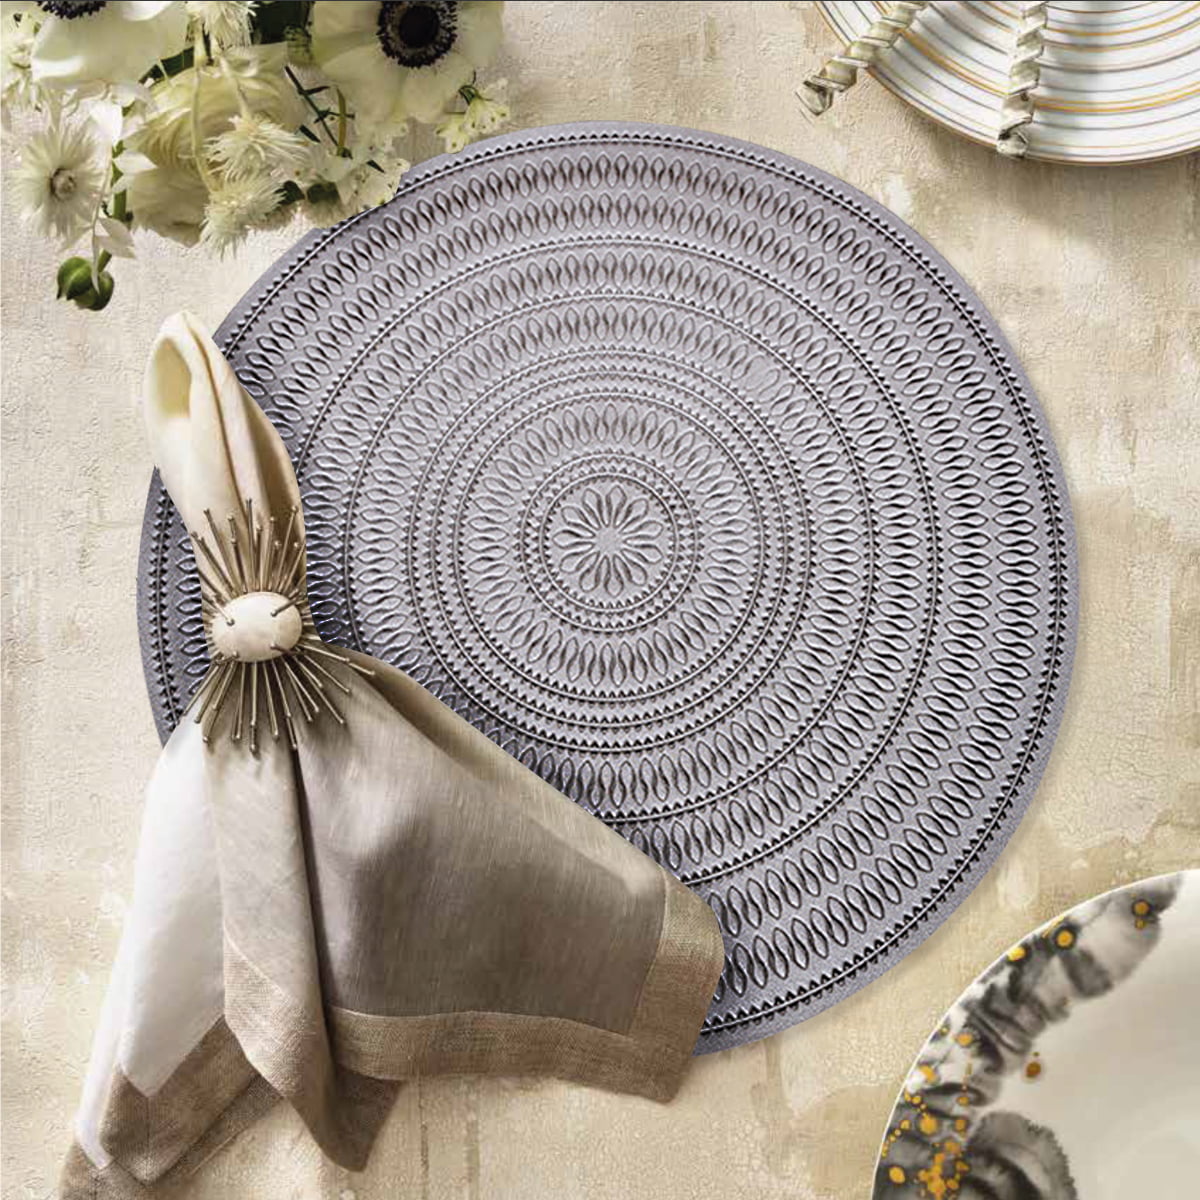 Country Rustic Decor Kitchen Table Placemats indigo Farmhouse Kitchen Decor Paper Placemats for Dining Table Mats Disposable More The Merrier Pak 24